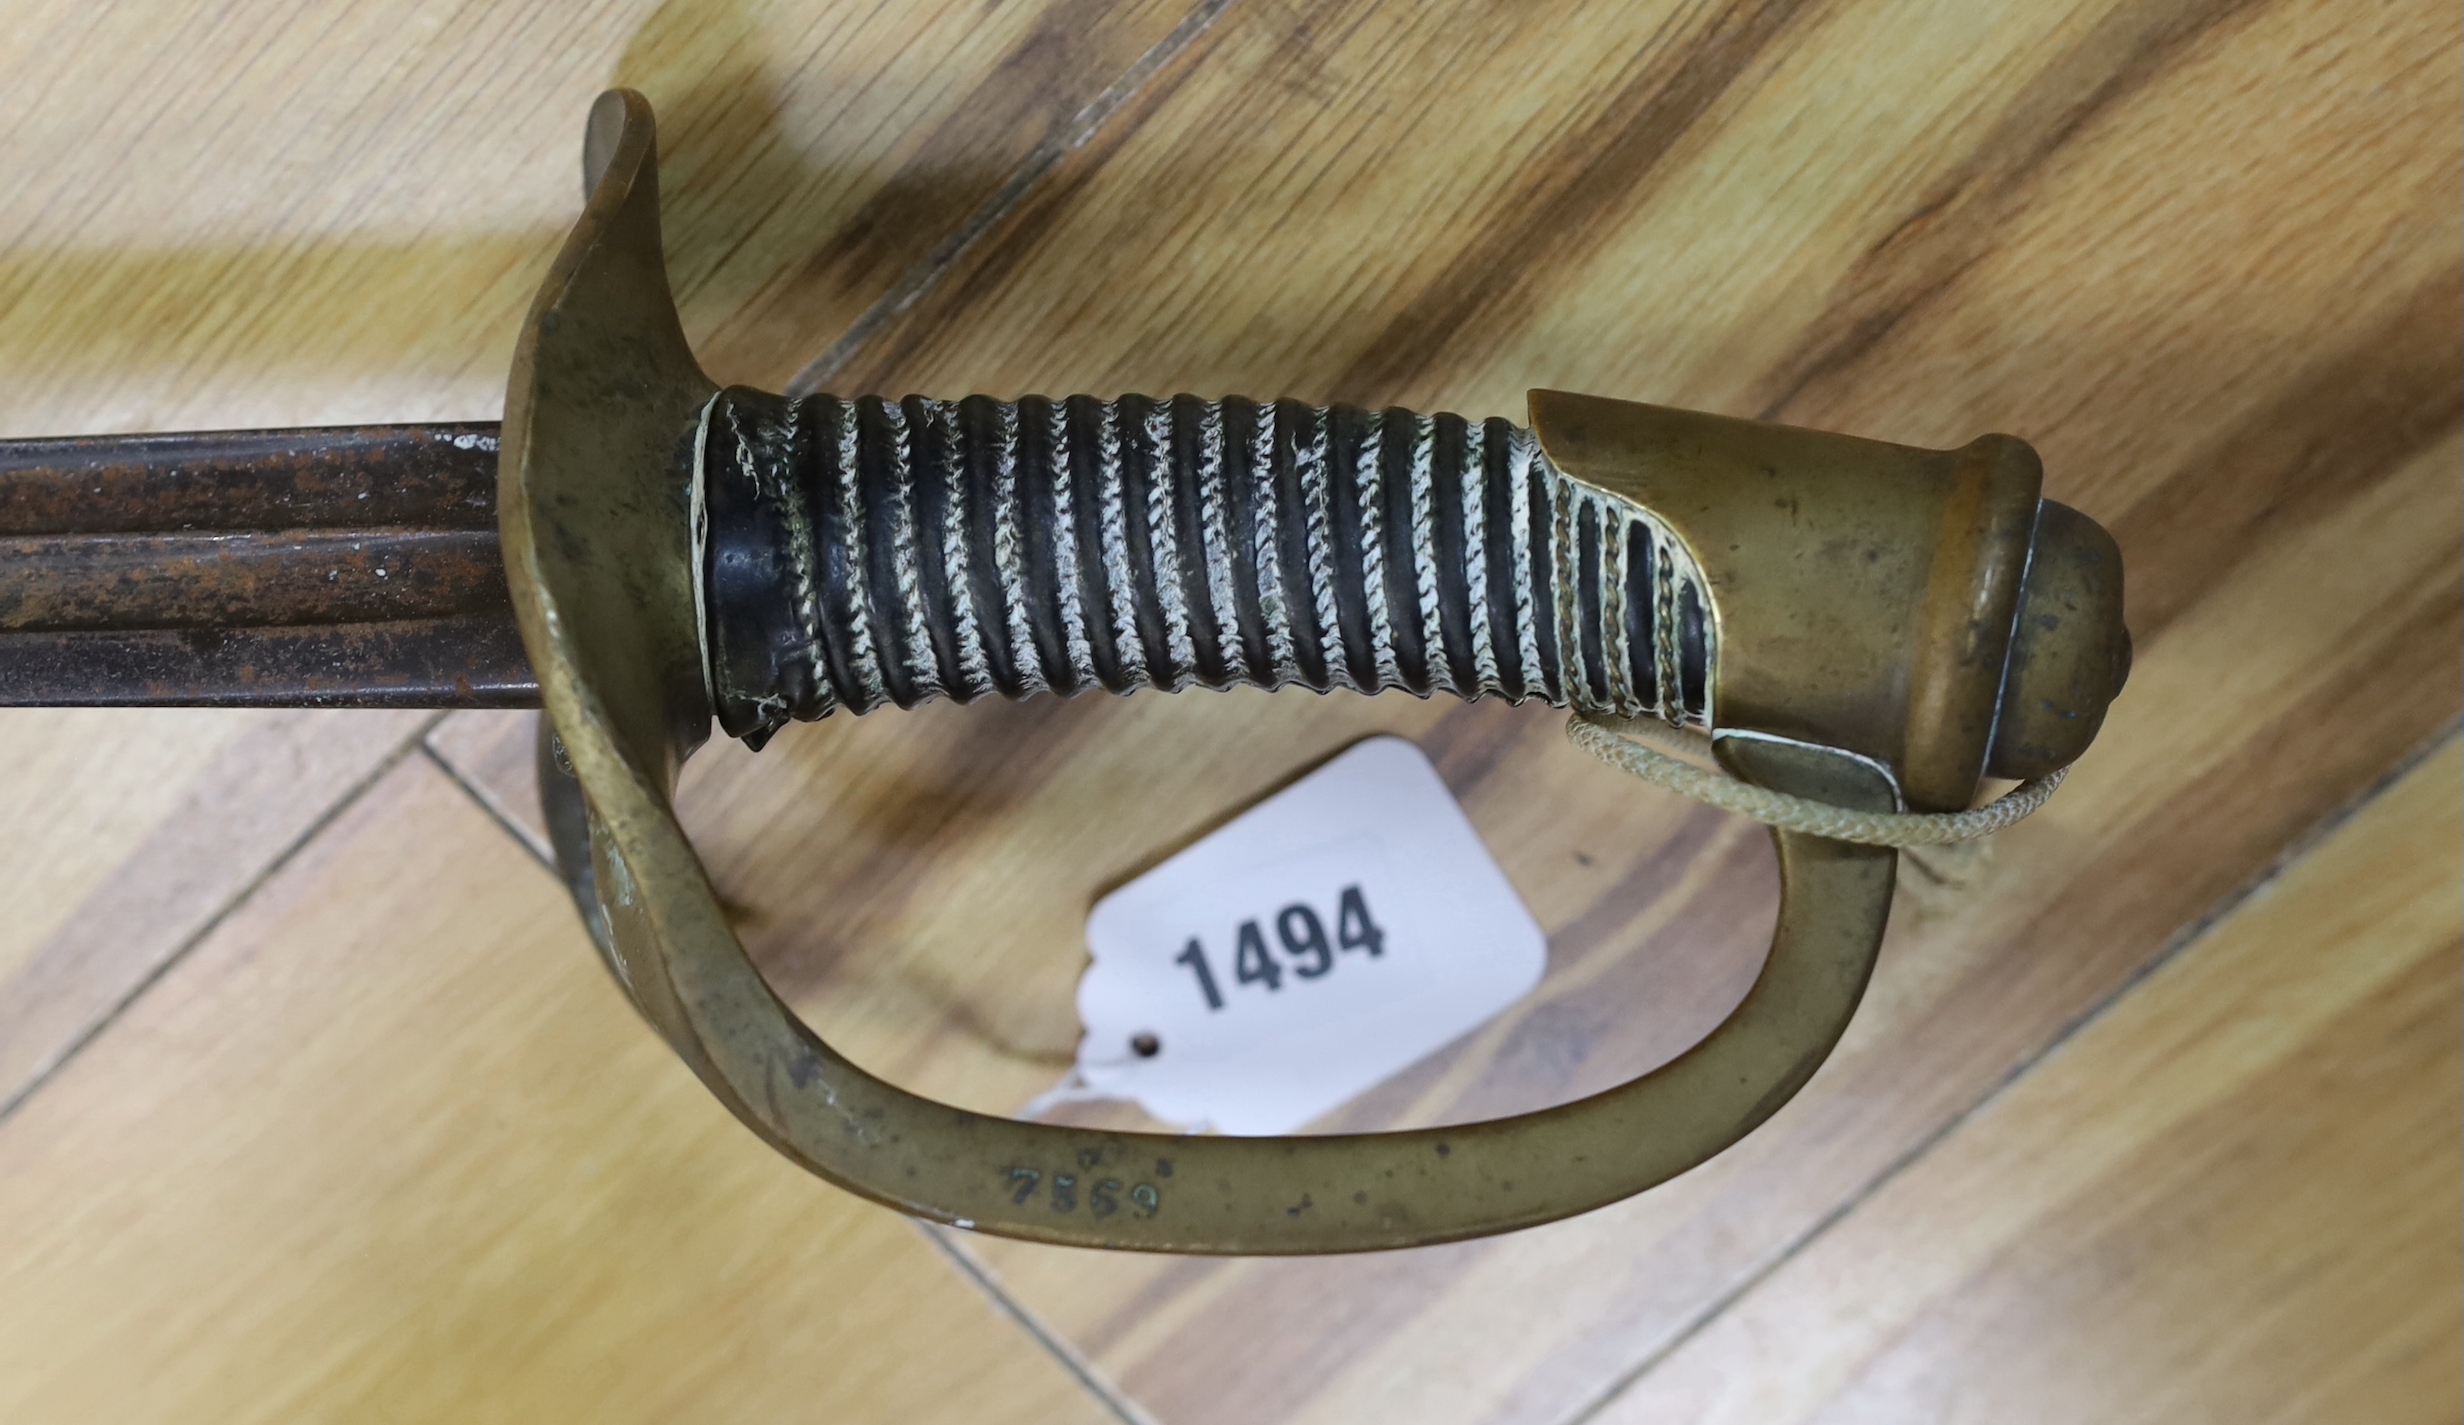 A 19th century French cavalry sword, 109cm long - Image 4 of 4